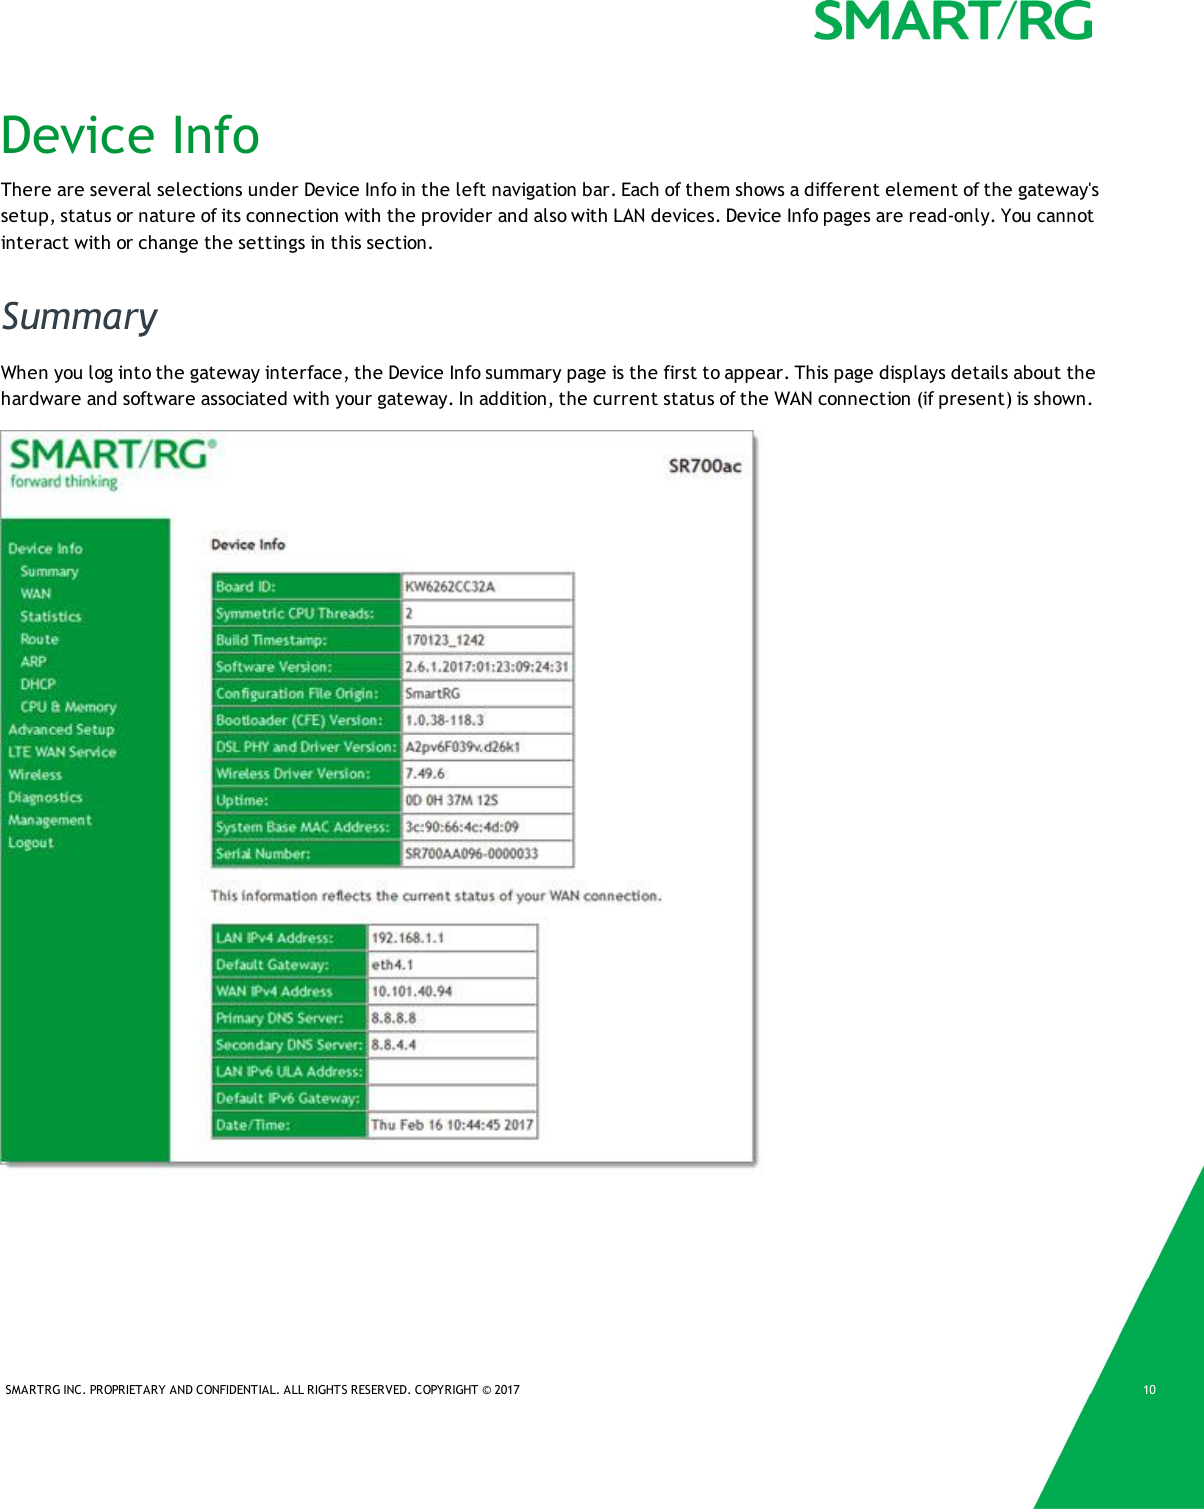 SMARTRG INC. PROPRIETARY AND CONFIDENTIAL. ALL RIGHTS RESERVED. COPYRIGHT © 2017 10Device InfoThere are several selections under Device Info in the left navigation bar. Each of them shows a different element of the gateway&apos;ssetup, status or nature of its connection with the provider and also with LAN devices. Device Info pages are read-only. You cannotinteract with or change the settings in this section.SummaryWhen you log into the gateway interface, the Device Info summary page is the first to appear. This page displays details about thehardware and software associated with your gateway. In addition, the current status of the WAN connection (if present) is shown.